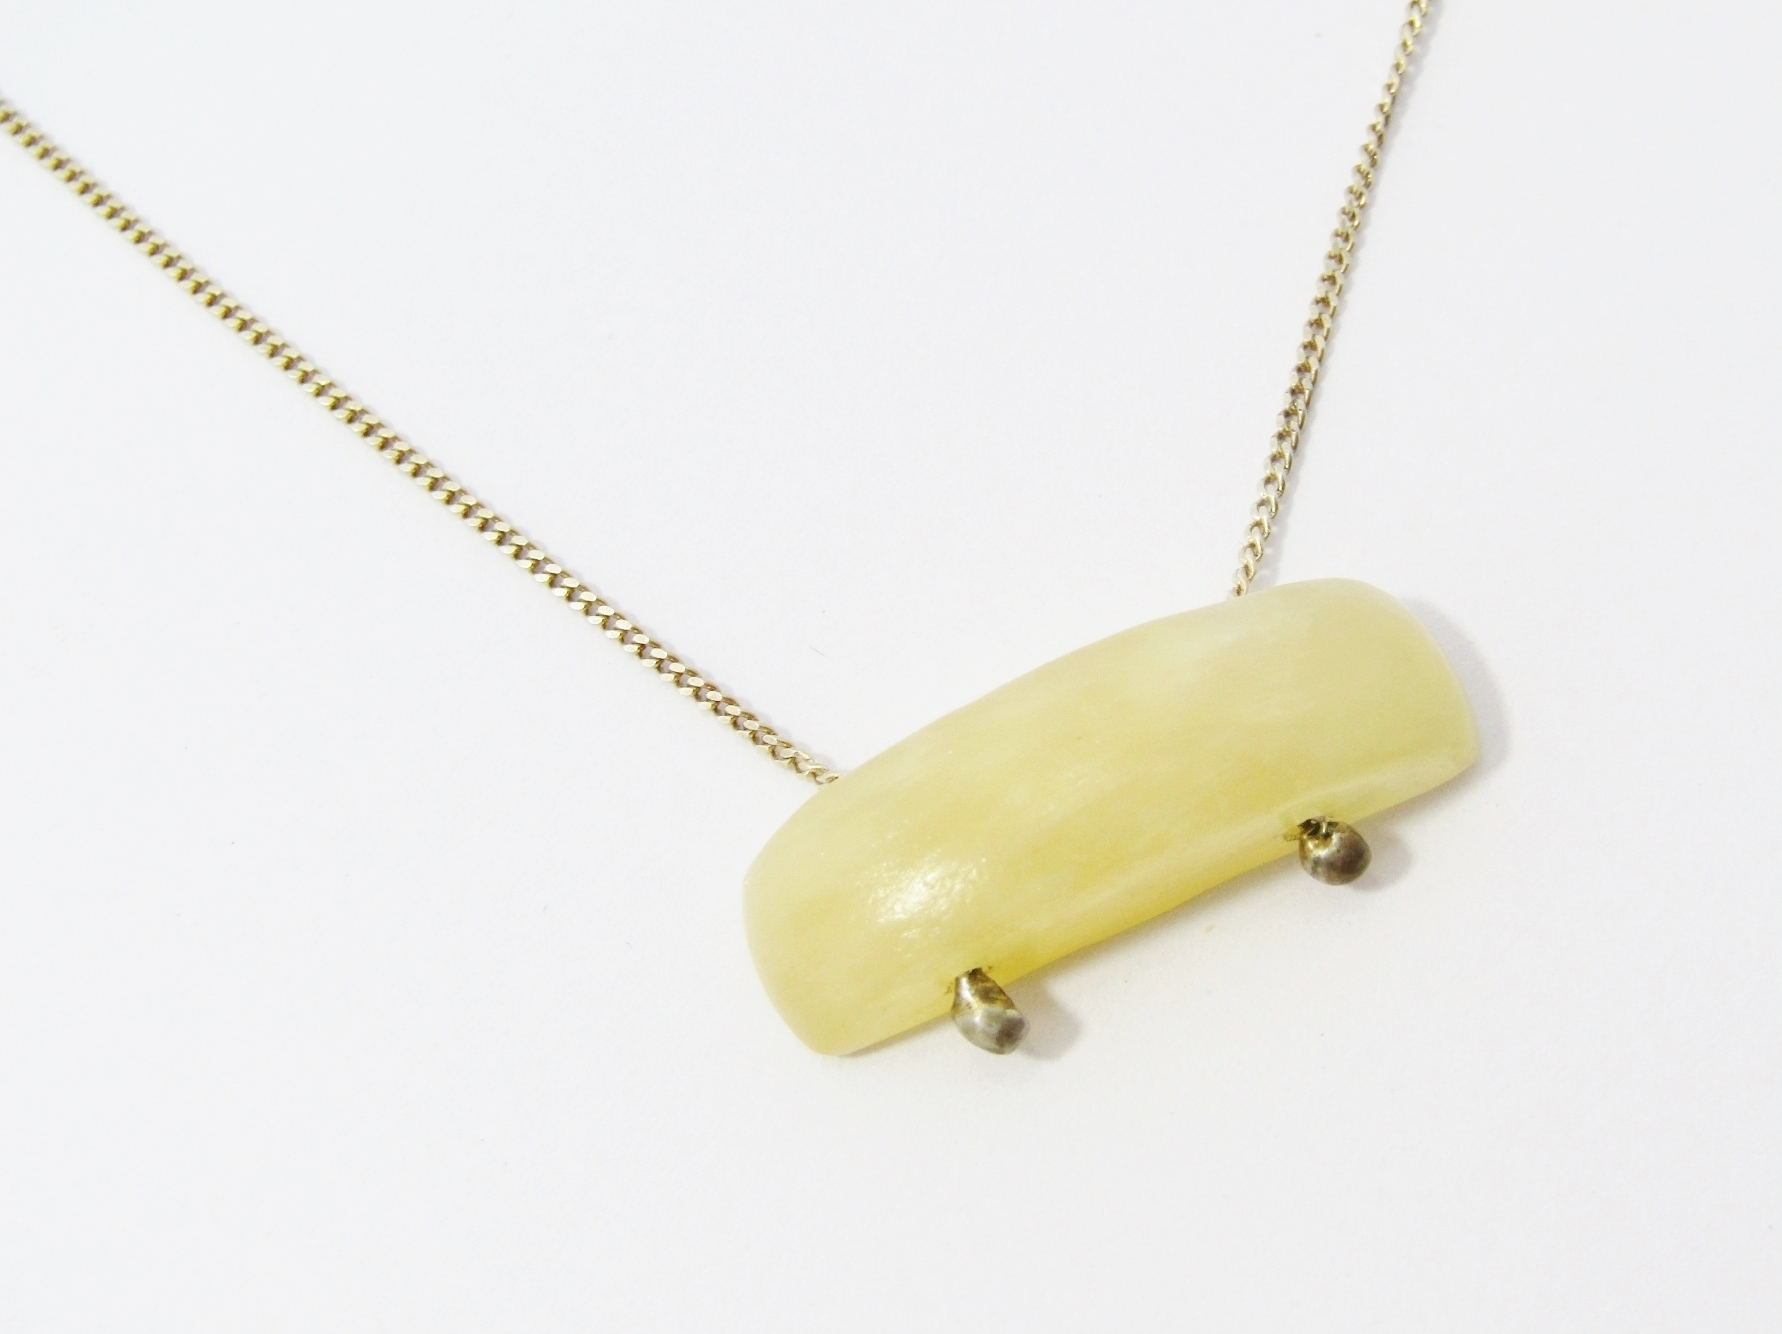 A Beautiful Gold Gilt Over Sterling Silver Necklace With a Agate Bar Pendant